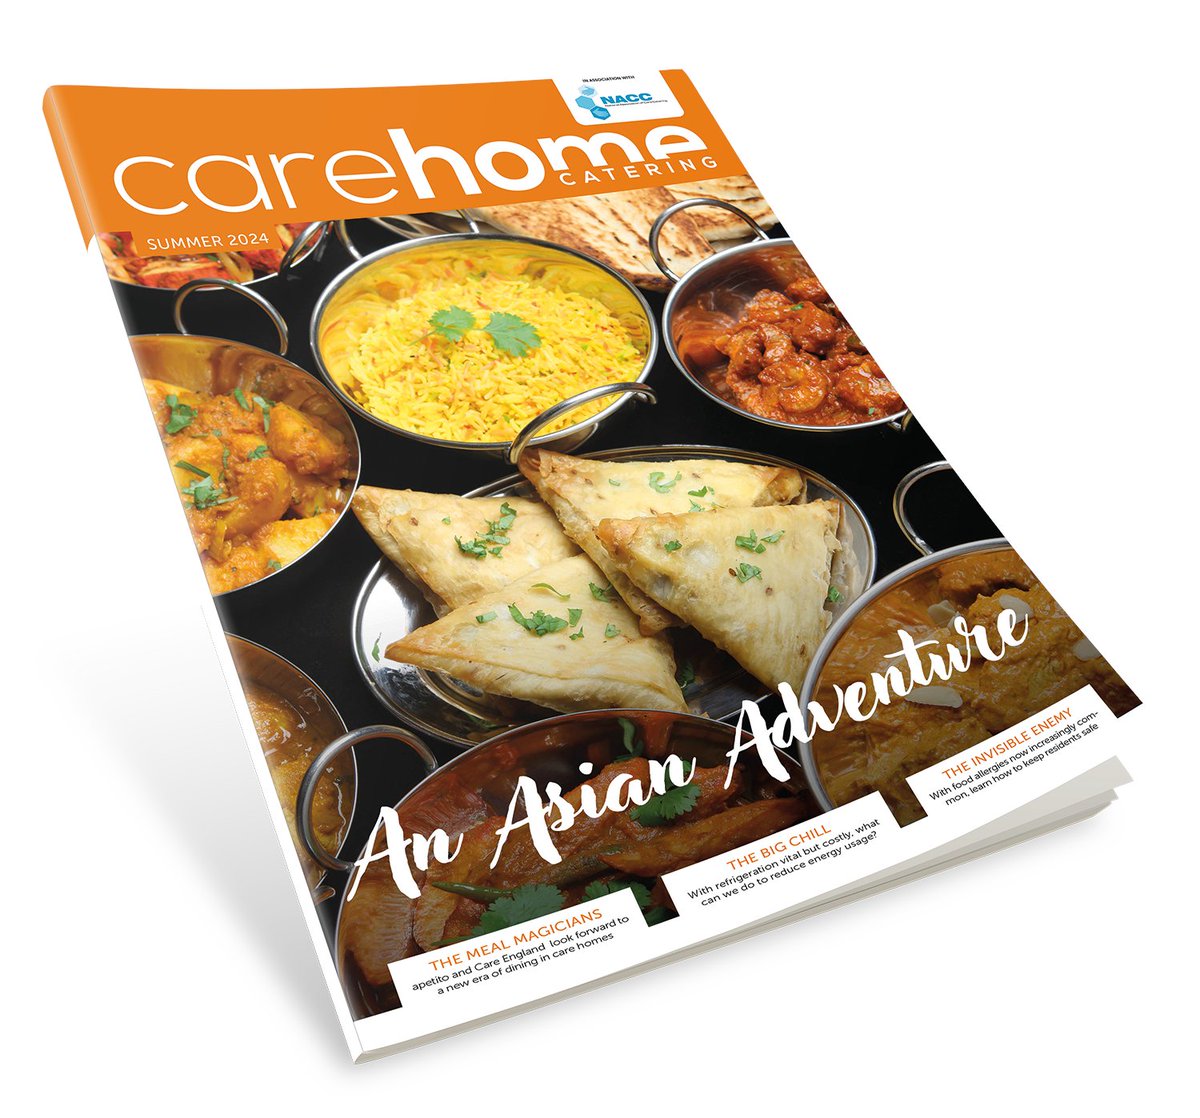 Read the Summer Issue of Care Home Catering online now! Highlights include a preview of the Care Home Catering Forum 2024 flickread.com/edition/html/6…